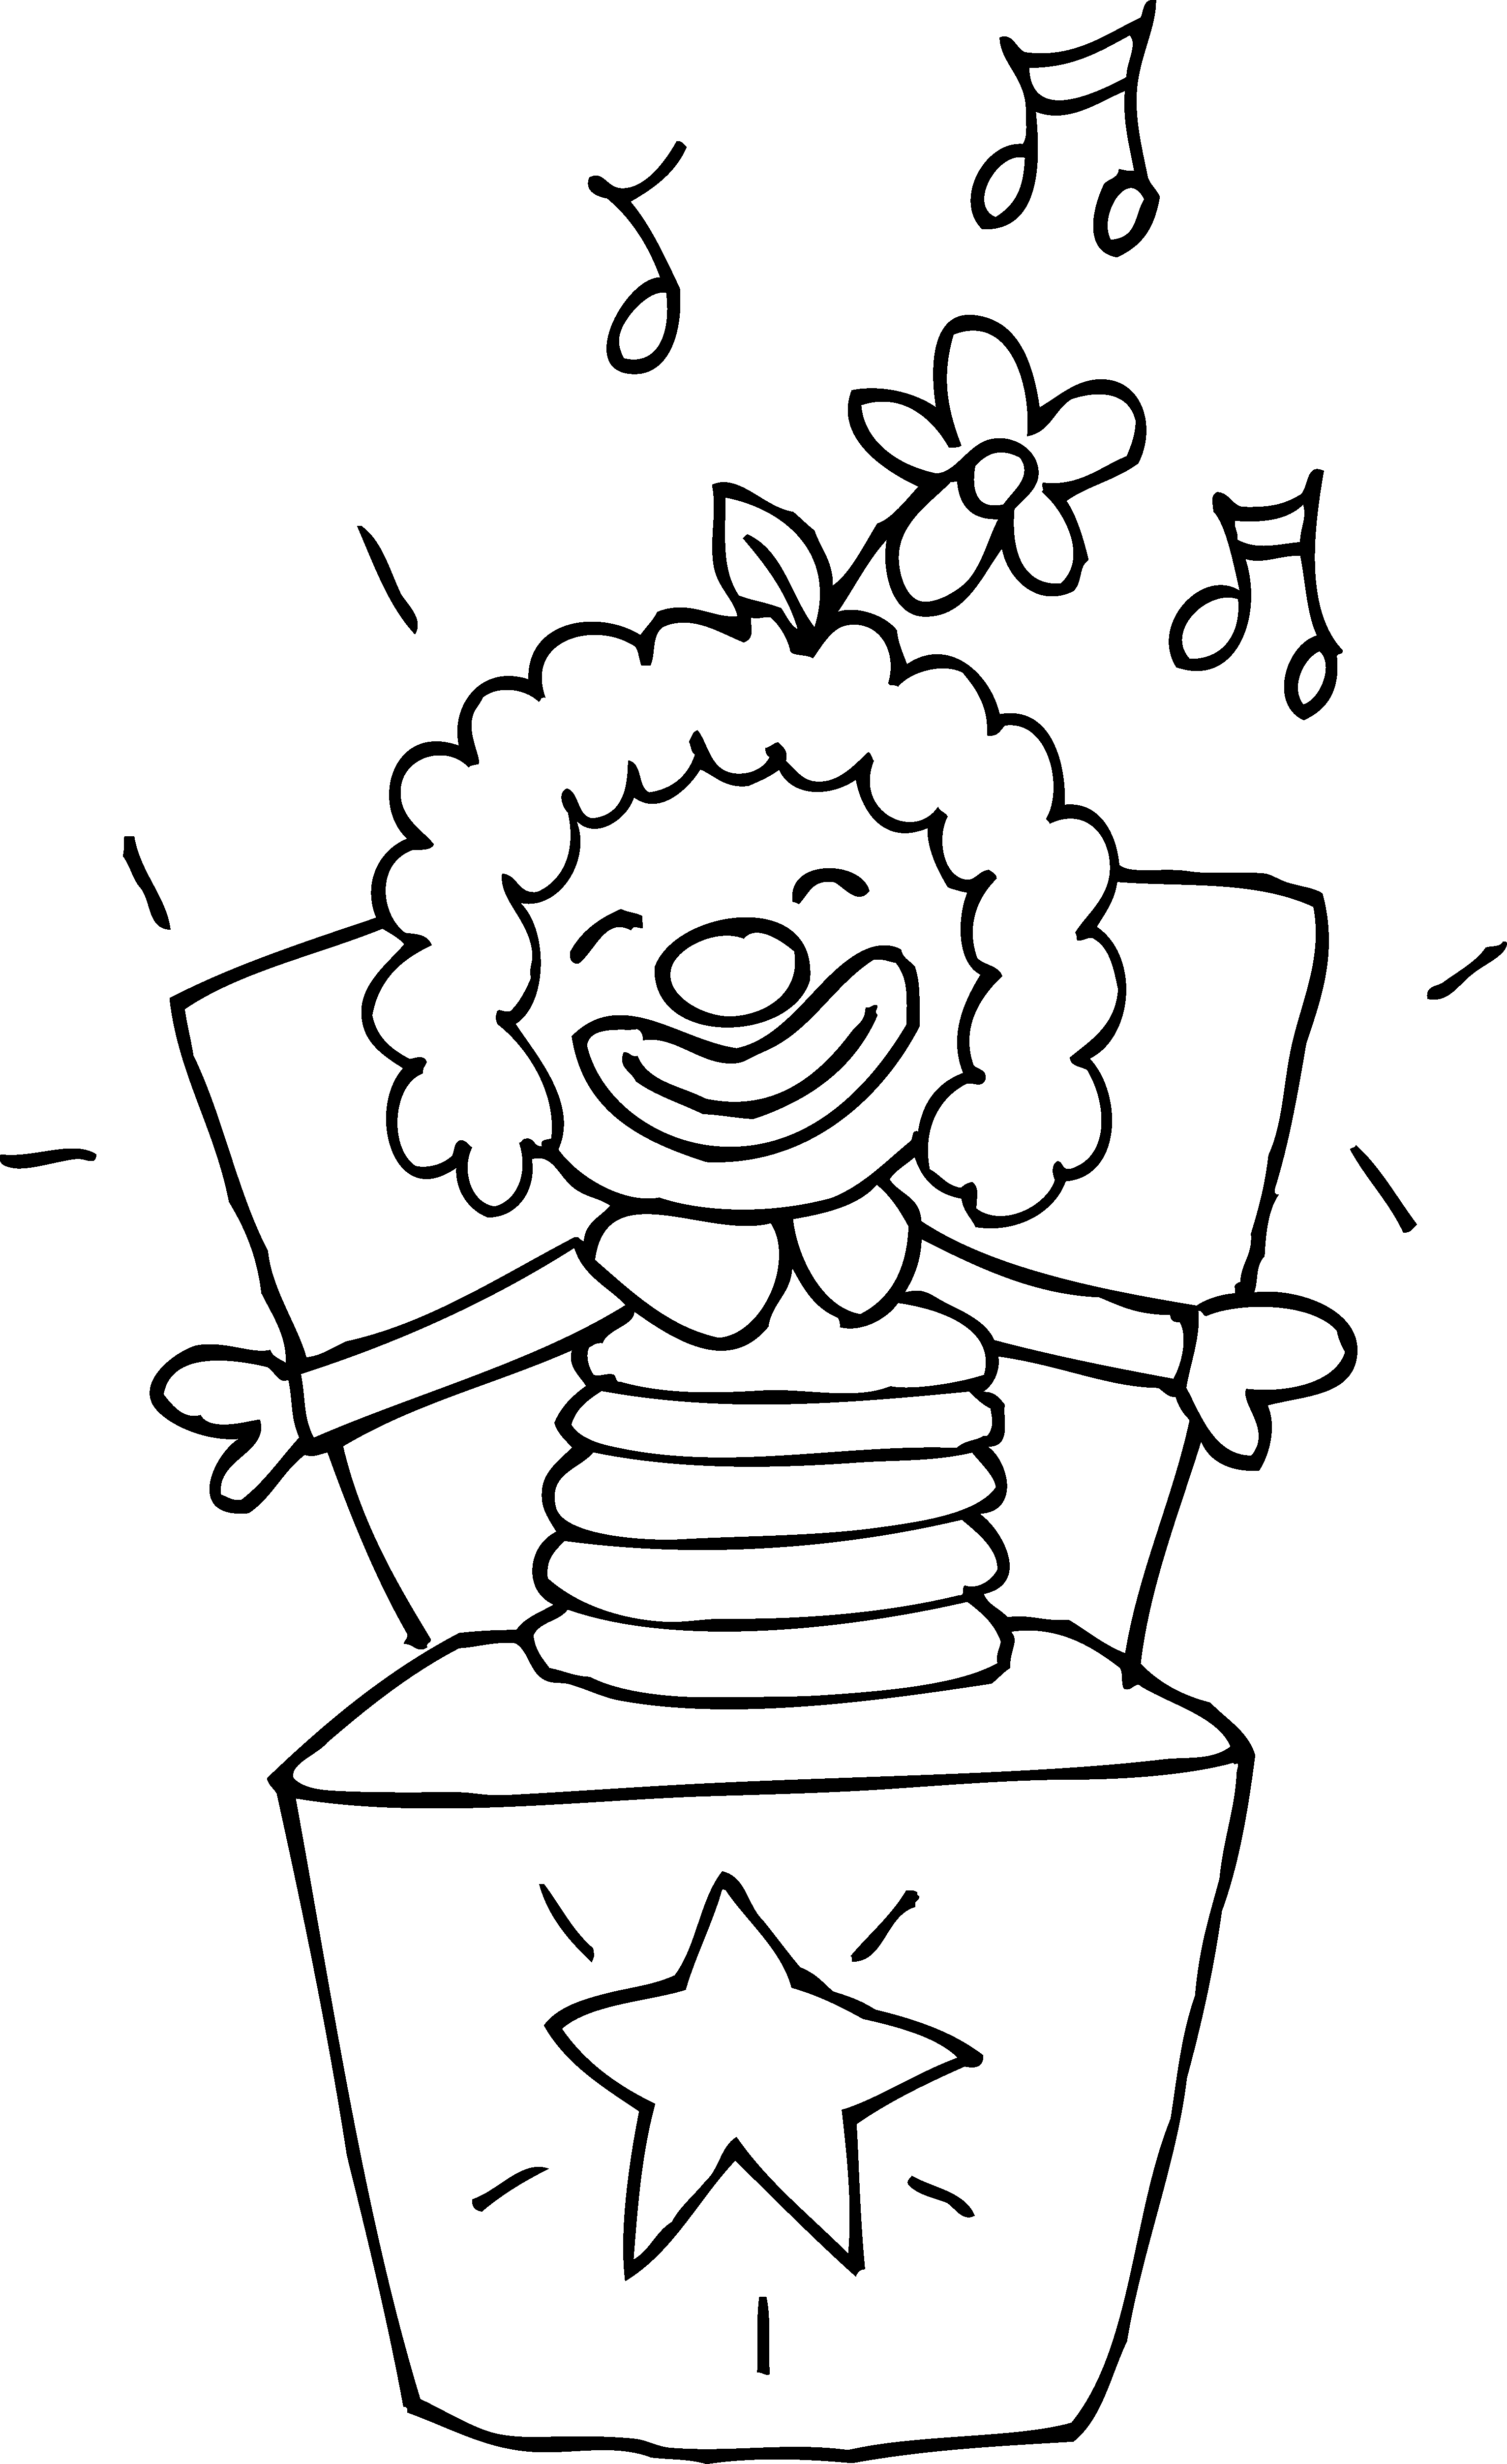 Colorable jack in the. Boxes clipart line drawing